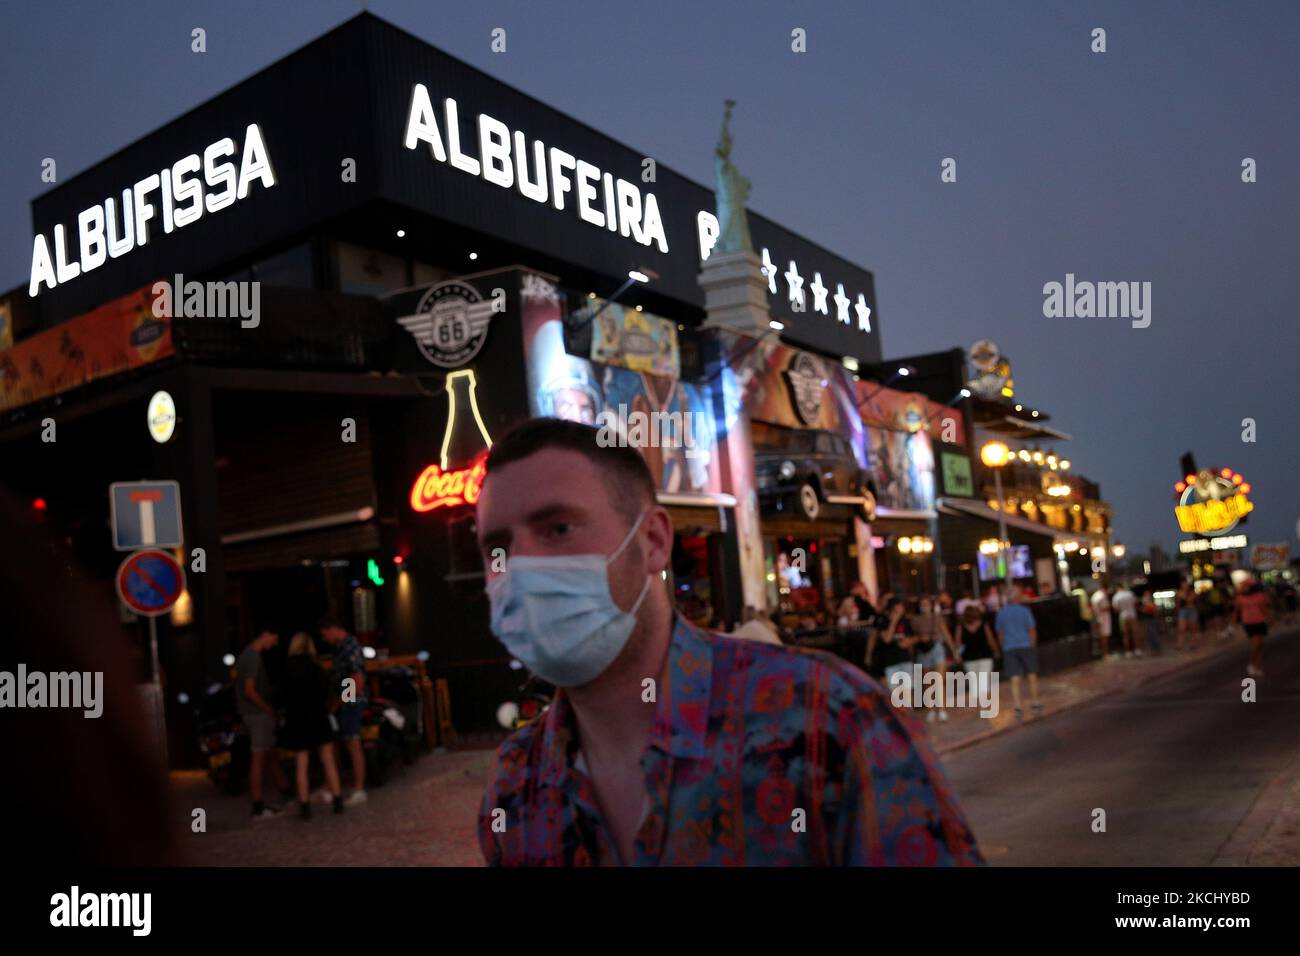 A man walks by a bar in Albufeira, Portugal on July 29, 2021. Portuguese Prime Minister Antonio Costa announced on Thursday a three-stage plan to lift COVID-19 restrictions, including scrapping a night-time curfew, as the country's vaccination rollout speeds up, helping to bring a recent surge in infections under control. From Sunday, localized curfews will end and restrictions on the opening times of restaurants, stores and cultural venues will be lifted, allowing them to stay open till 2 a.m. (Photo by Pedro FiÃºza/NurPhoto) Stock Photo